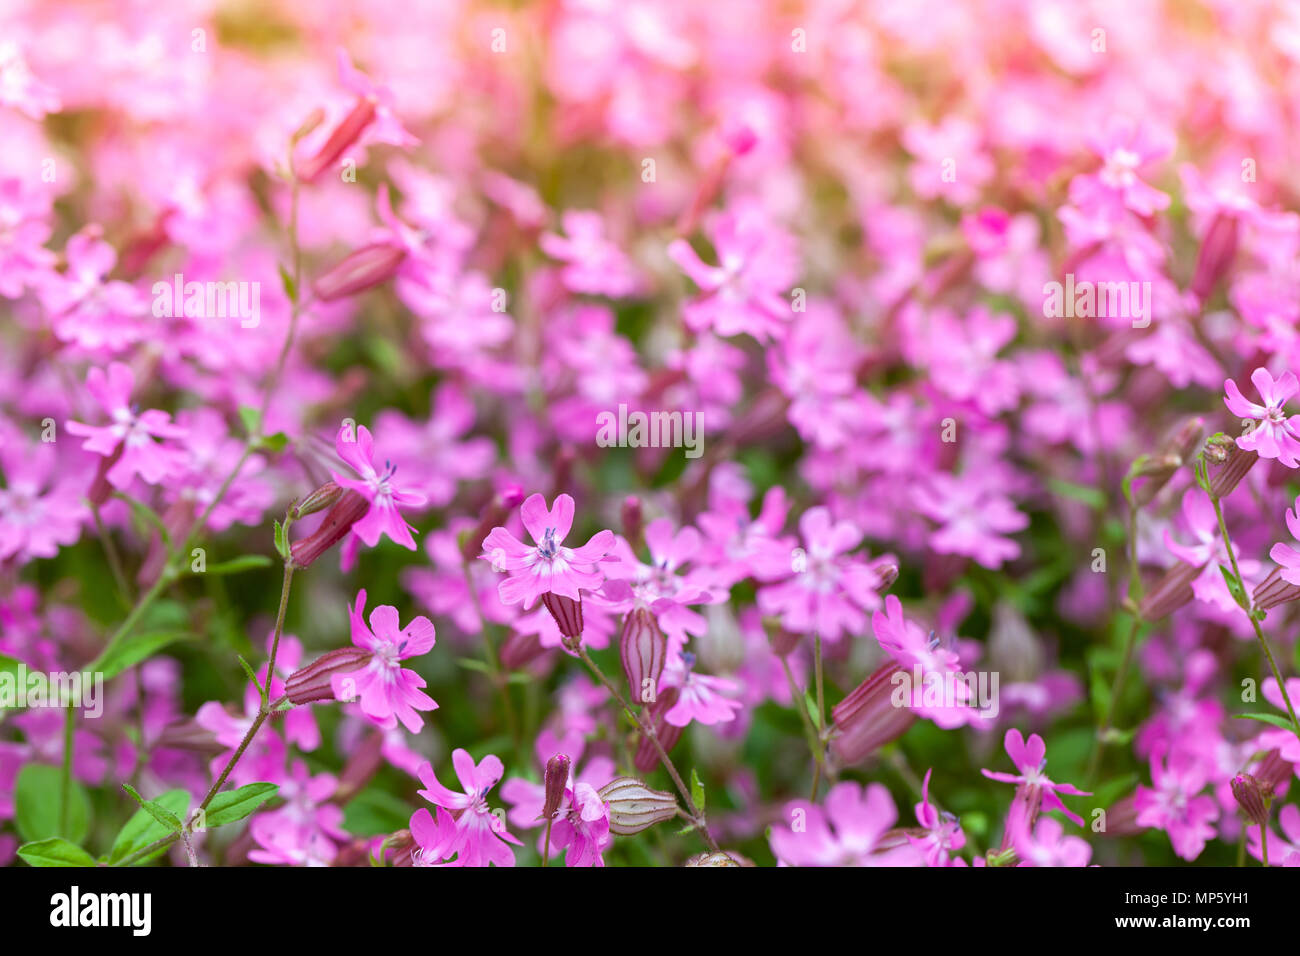 Bright pink flowers in spring garden. Close-up photo with selective focus. Phlox subulata or Creeping Phlox Stock Photo